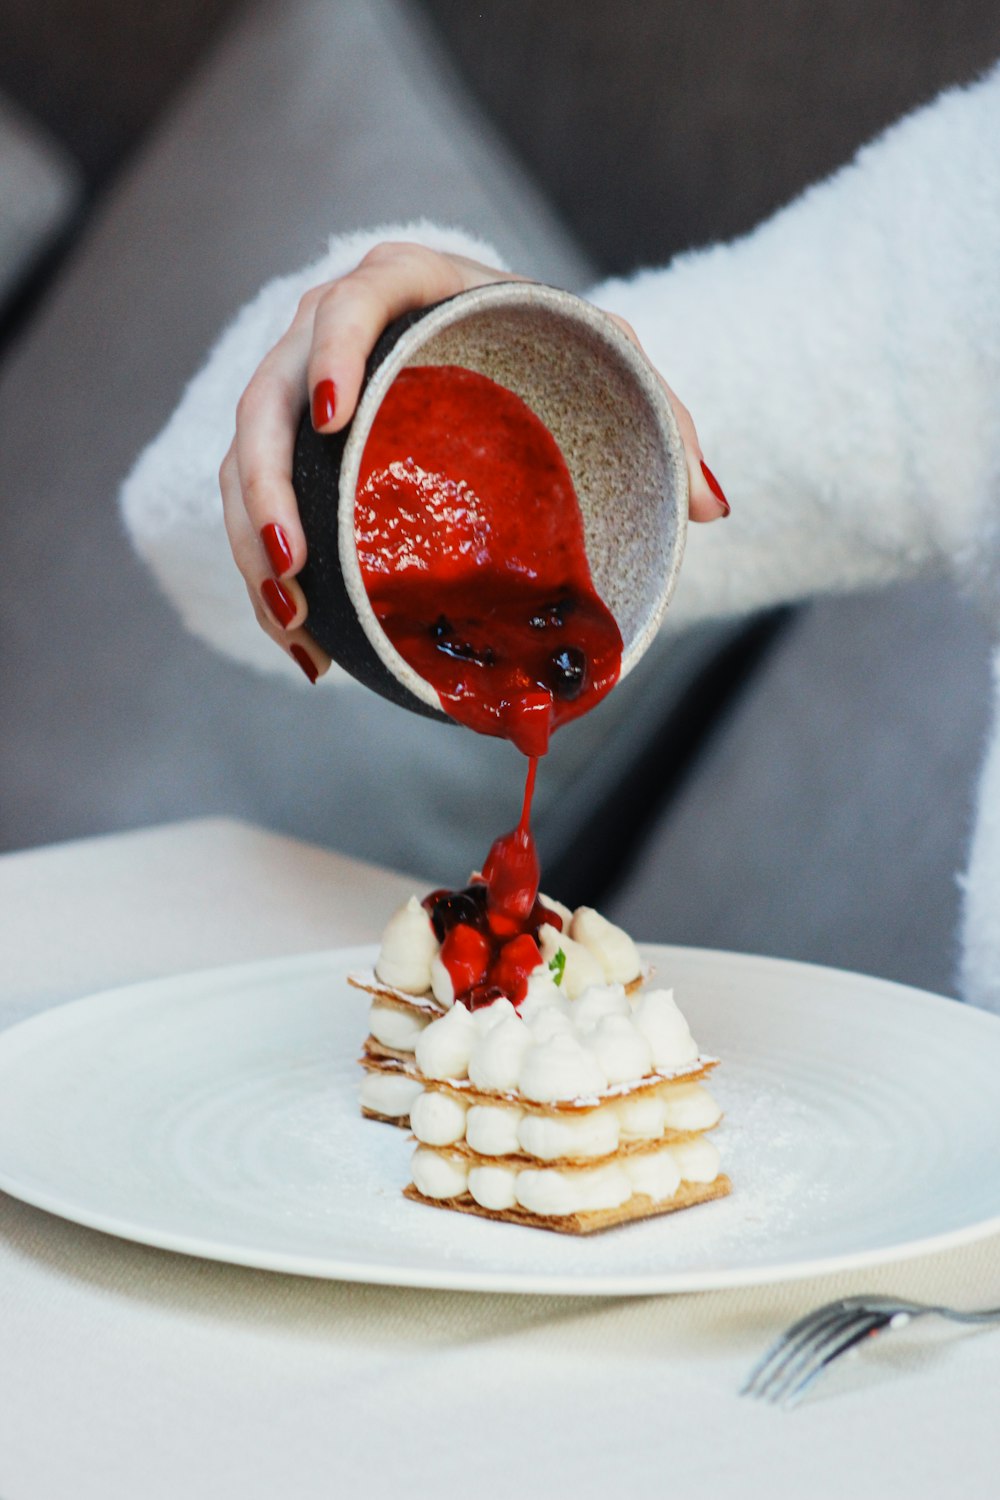 a person pouring sauce onto a dessert on a plate